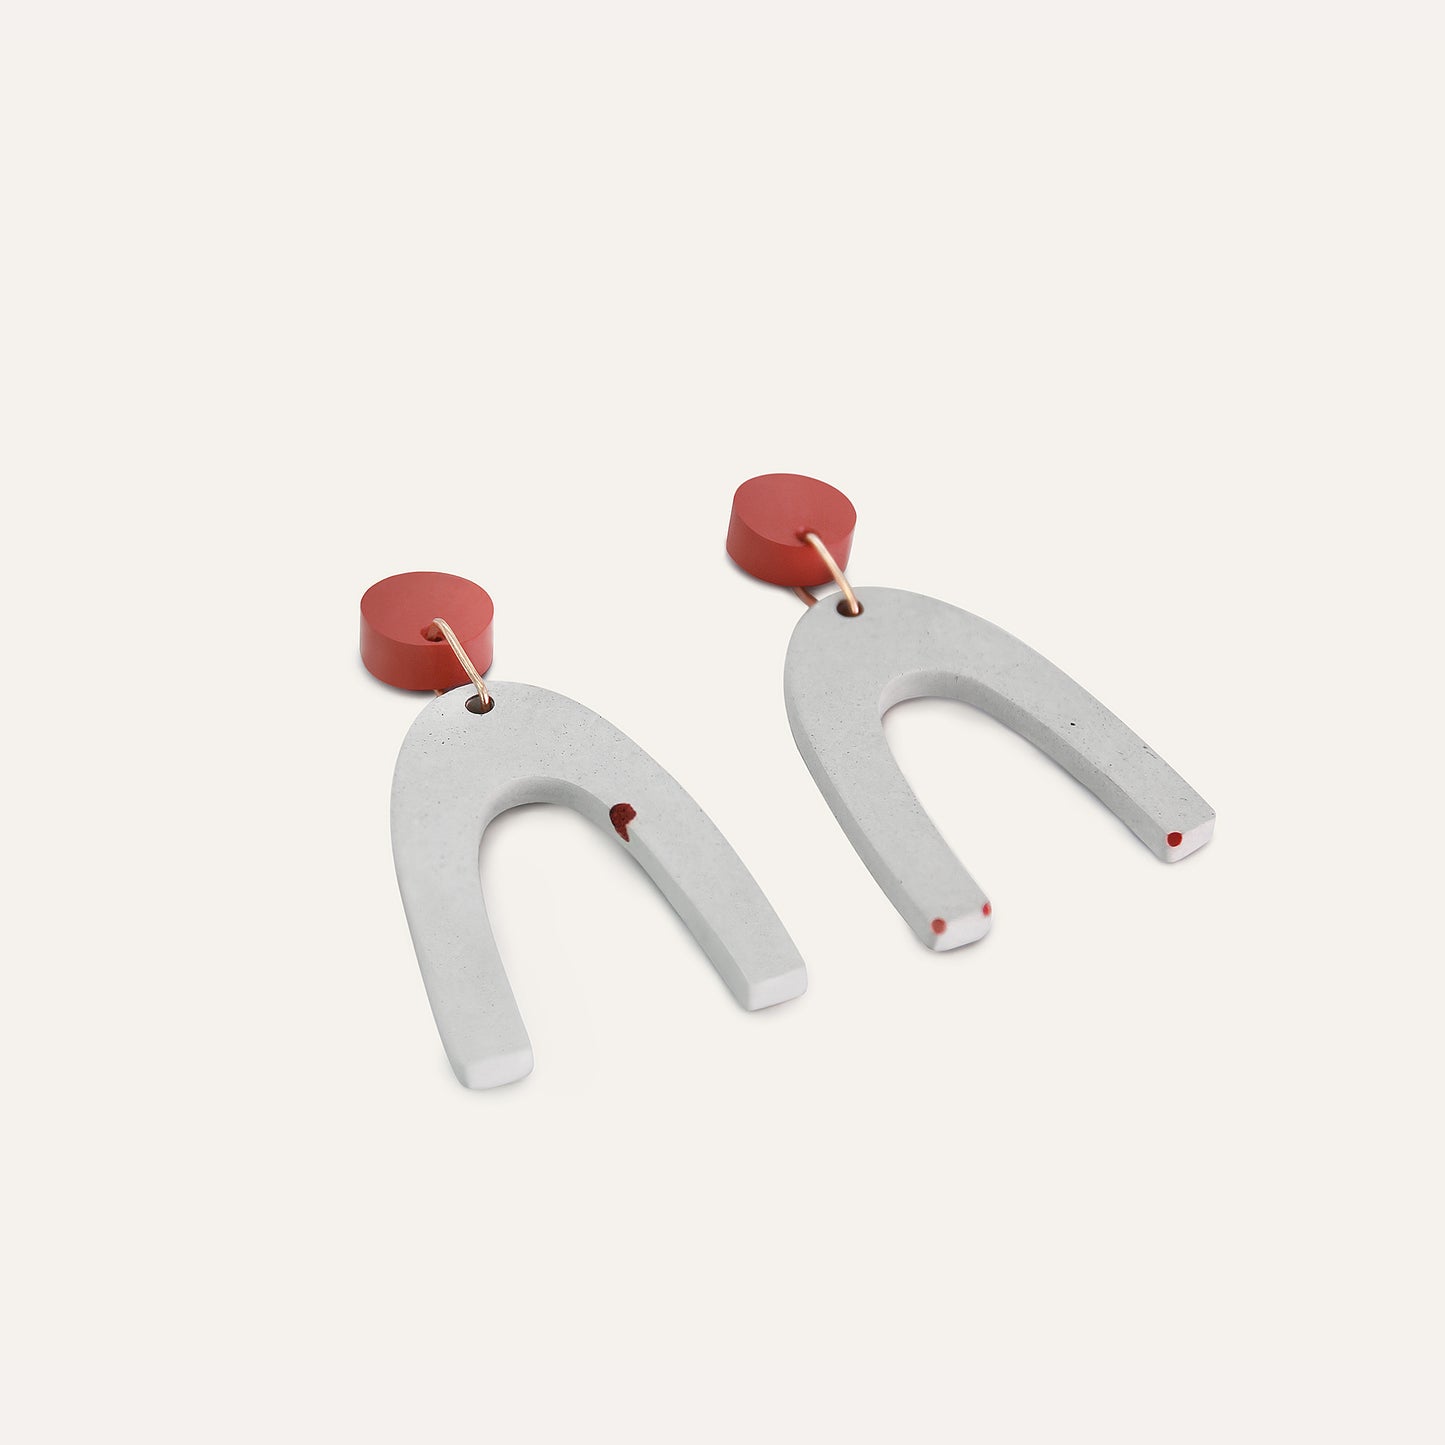 Incurved Arche Earrings Type III - Red/Grey